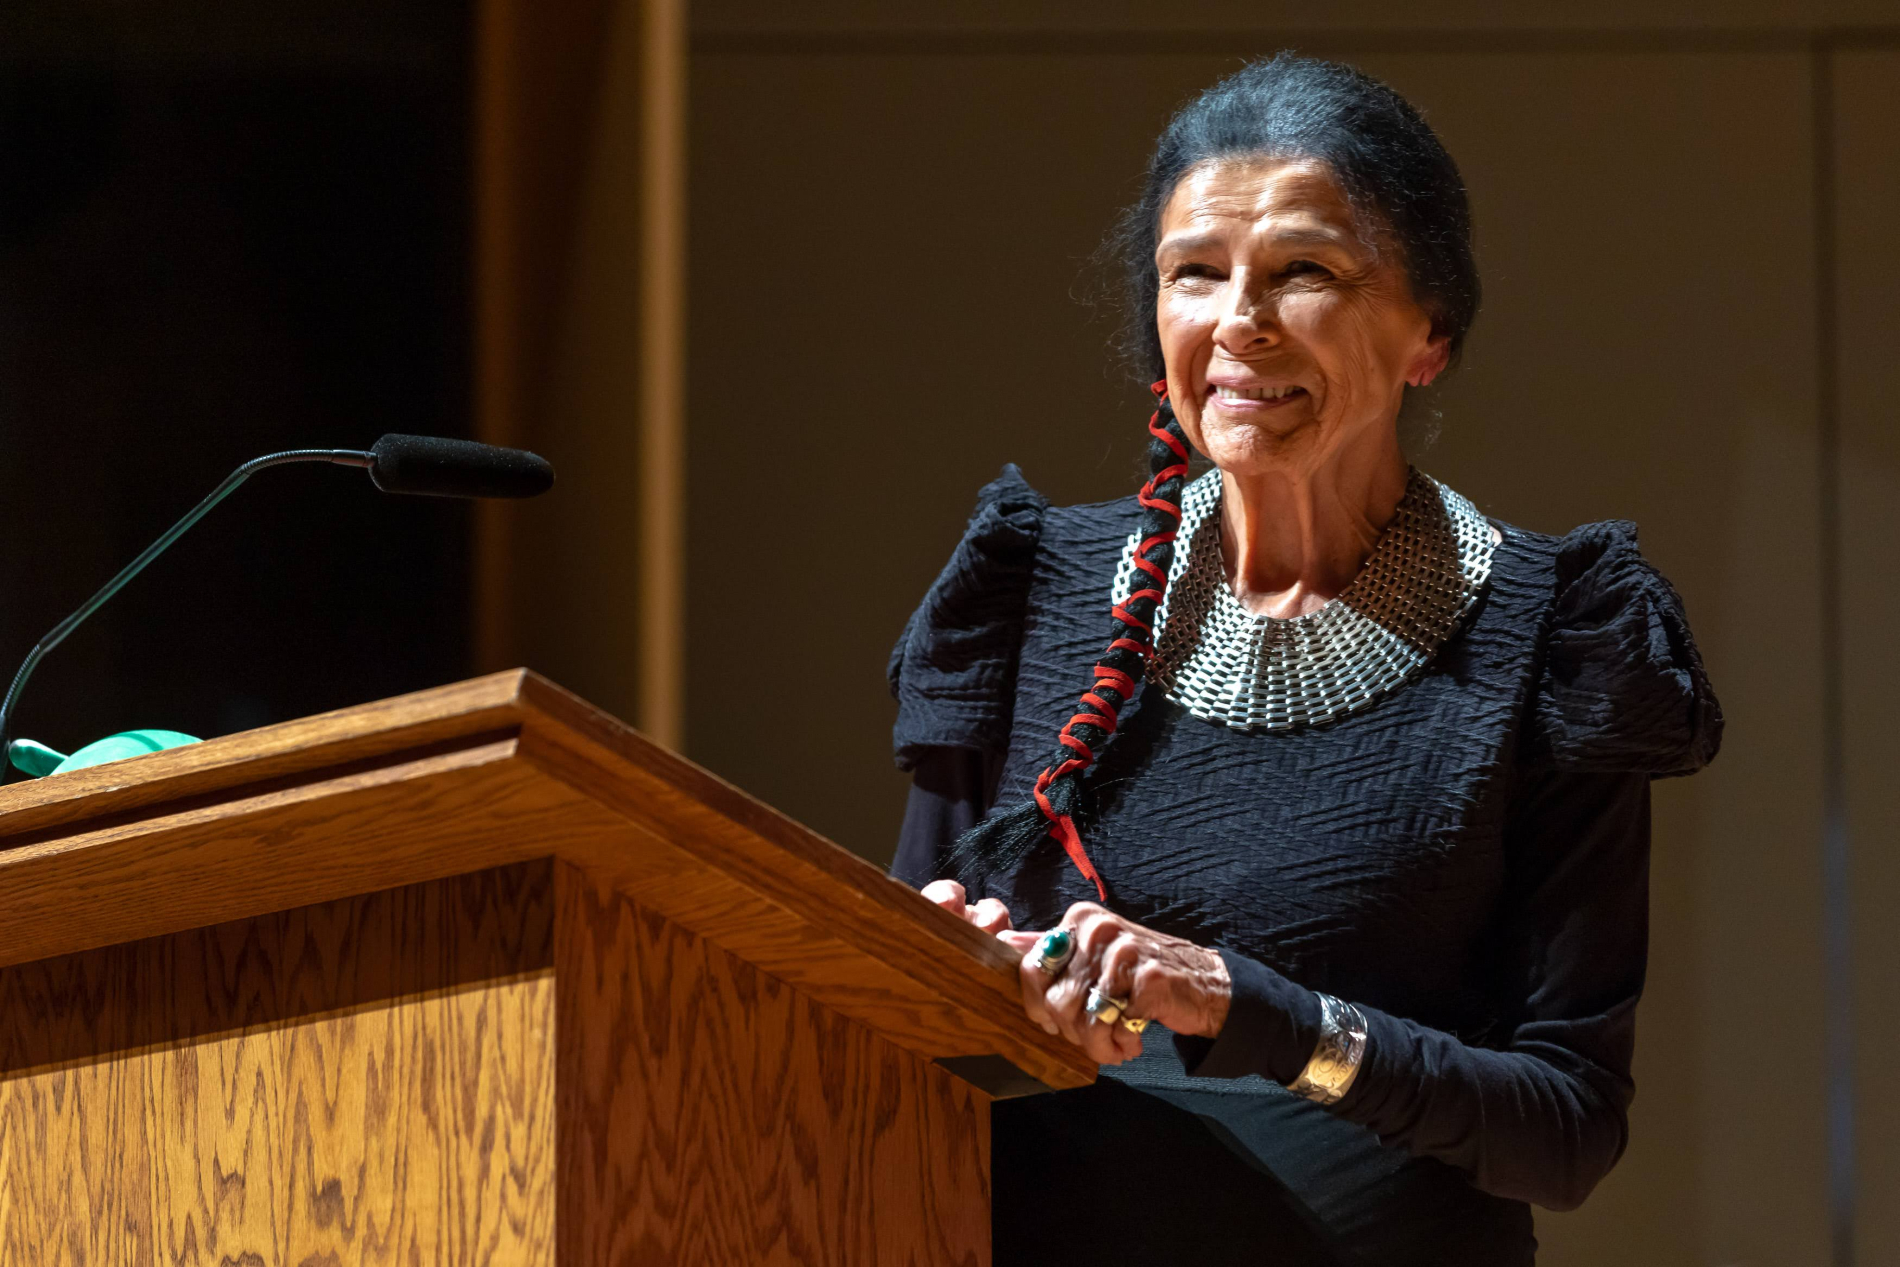 A woman (Alanis Obomsawin) stands at a podium, smiling. She is wearing a black dress. Her hair is braided and she is wearing a large silver necklace. 